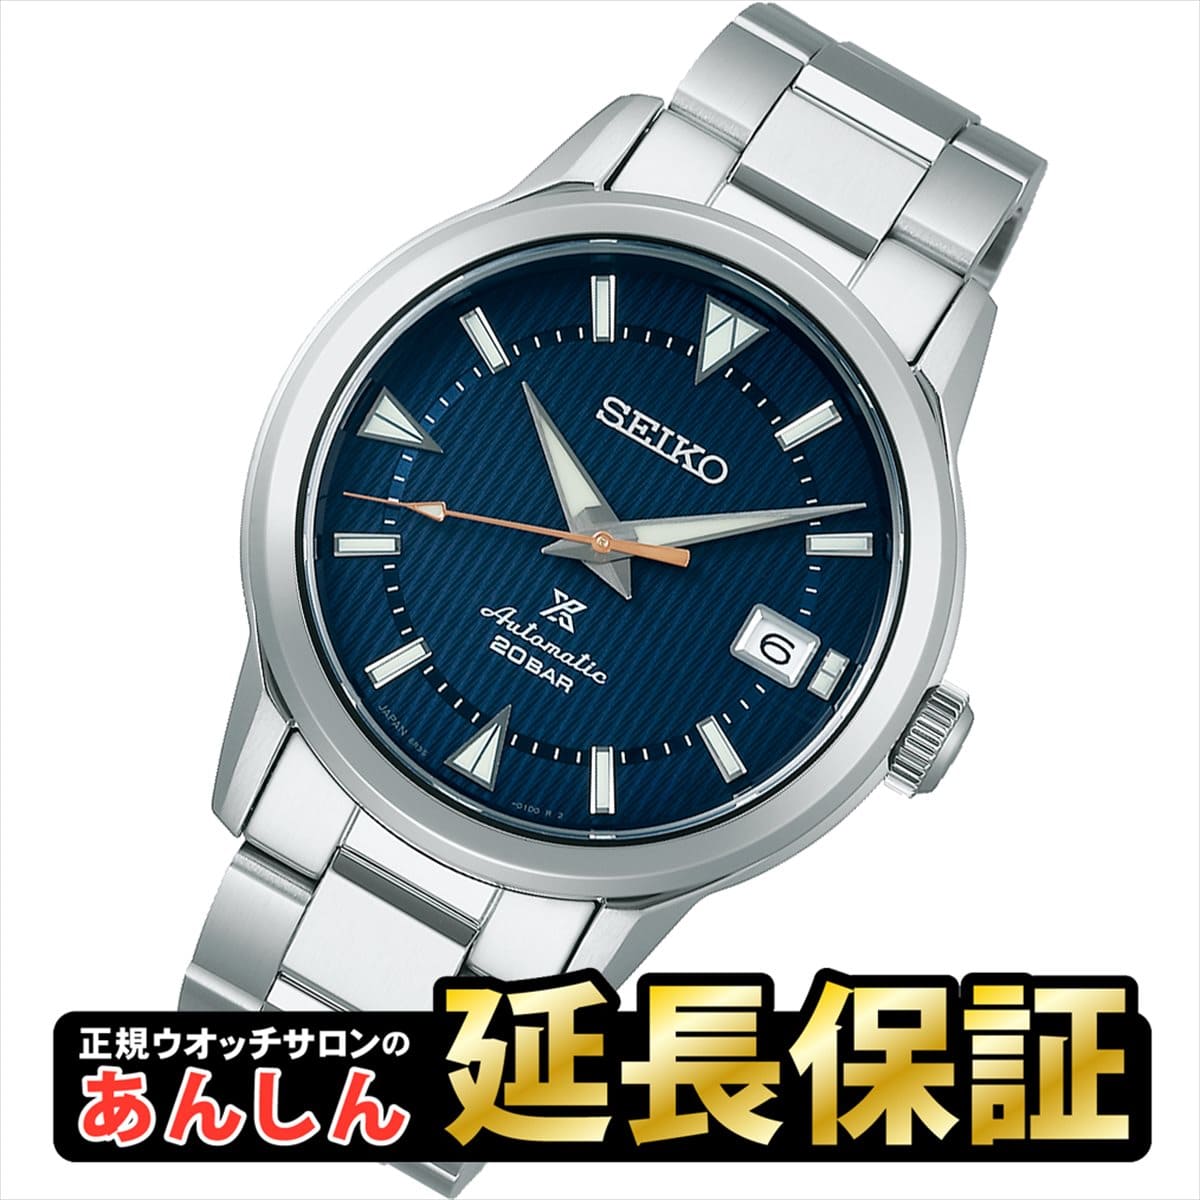 New]up to 5,000 & up to 34 times! It is SEIKO up to 30 loan SEIKO Pross  pecks SBDC159 Alpinist core shop SEIKO PROSPEX _10spl 1221 until 9:59 - BE  FORWARD Store